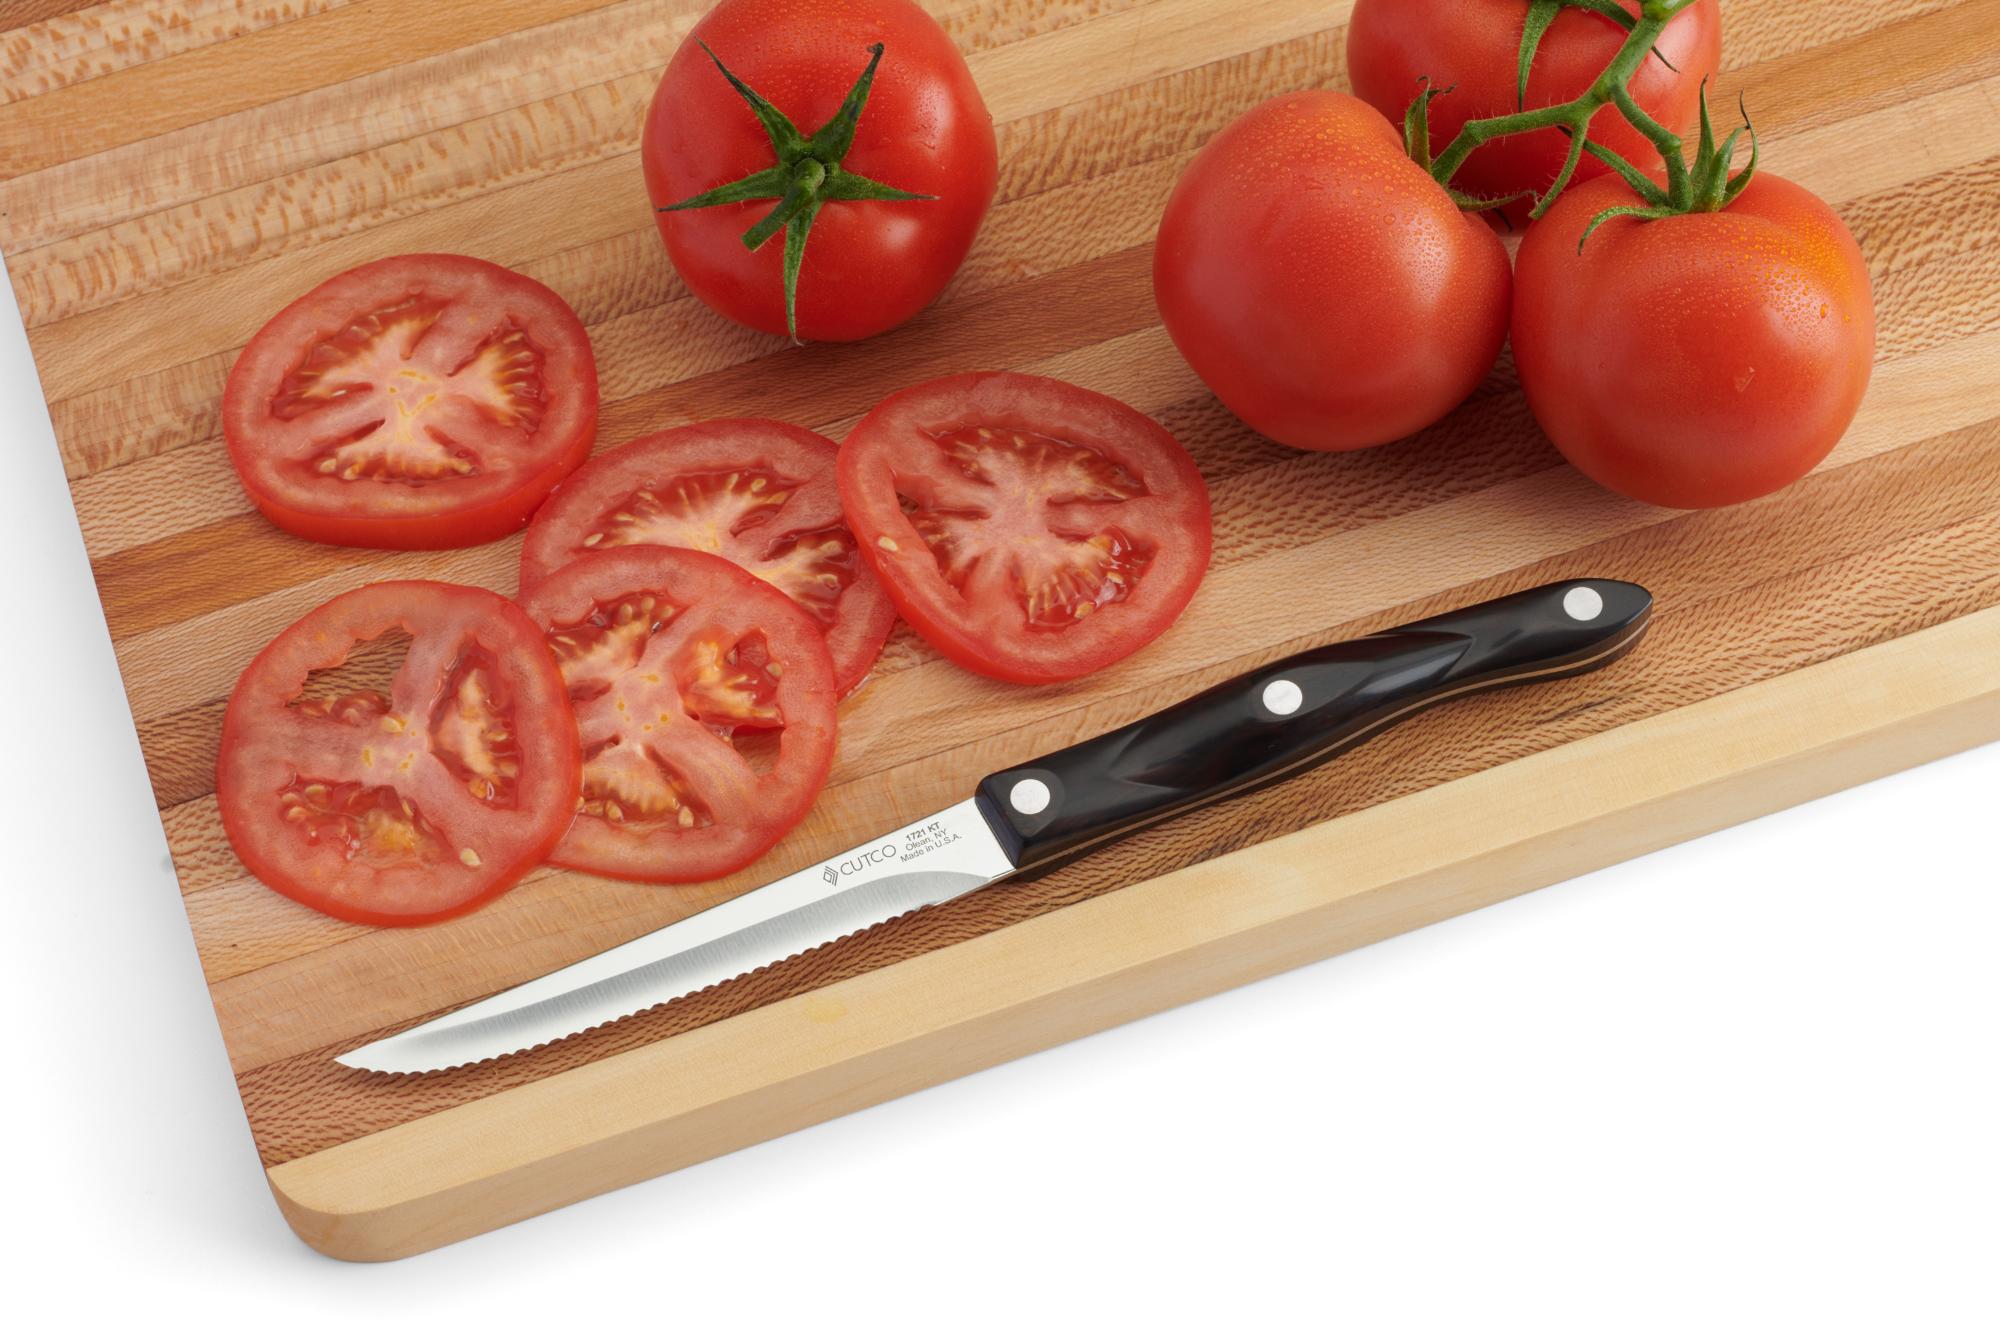 Sliced tomatoes with a Trimmer.